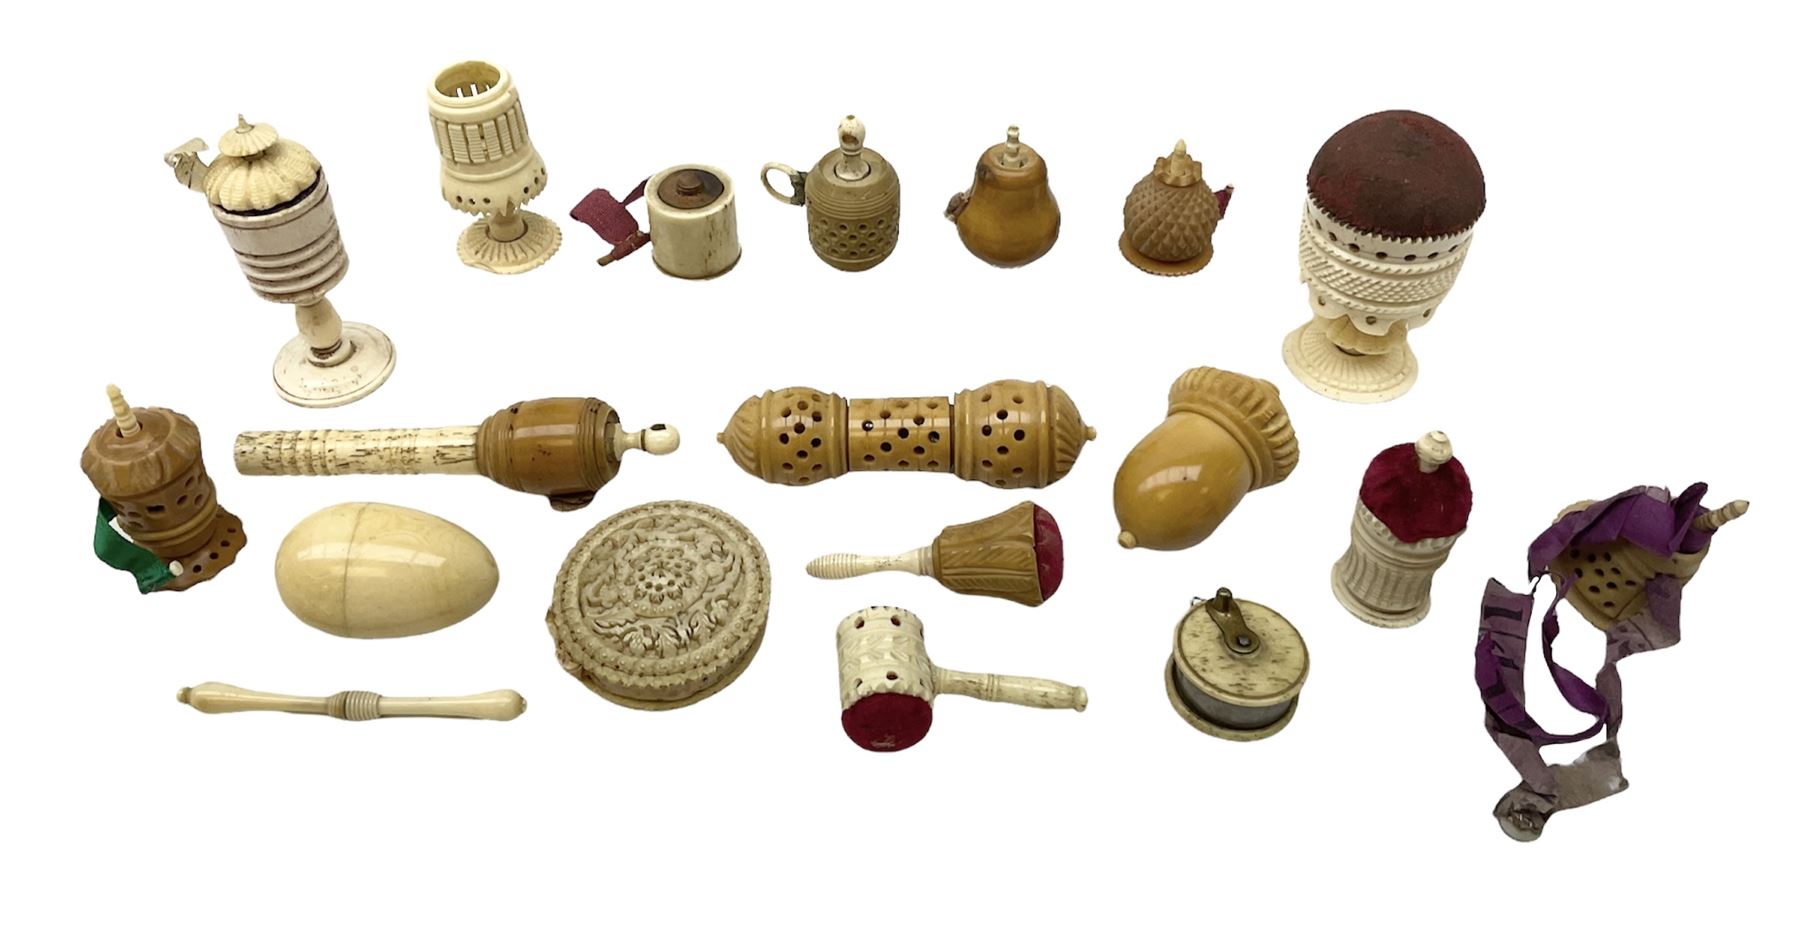 19th century bone and vegetable ivory sewing items including needles cases